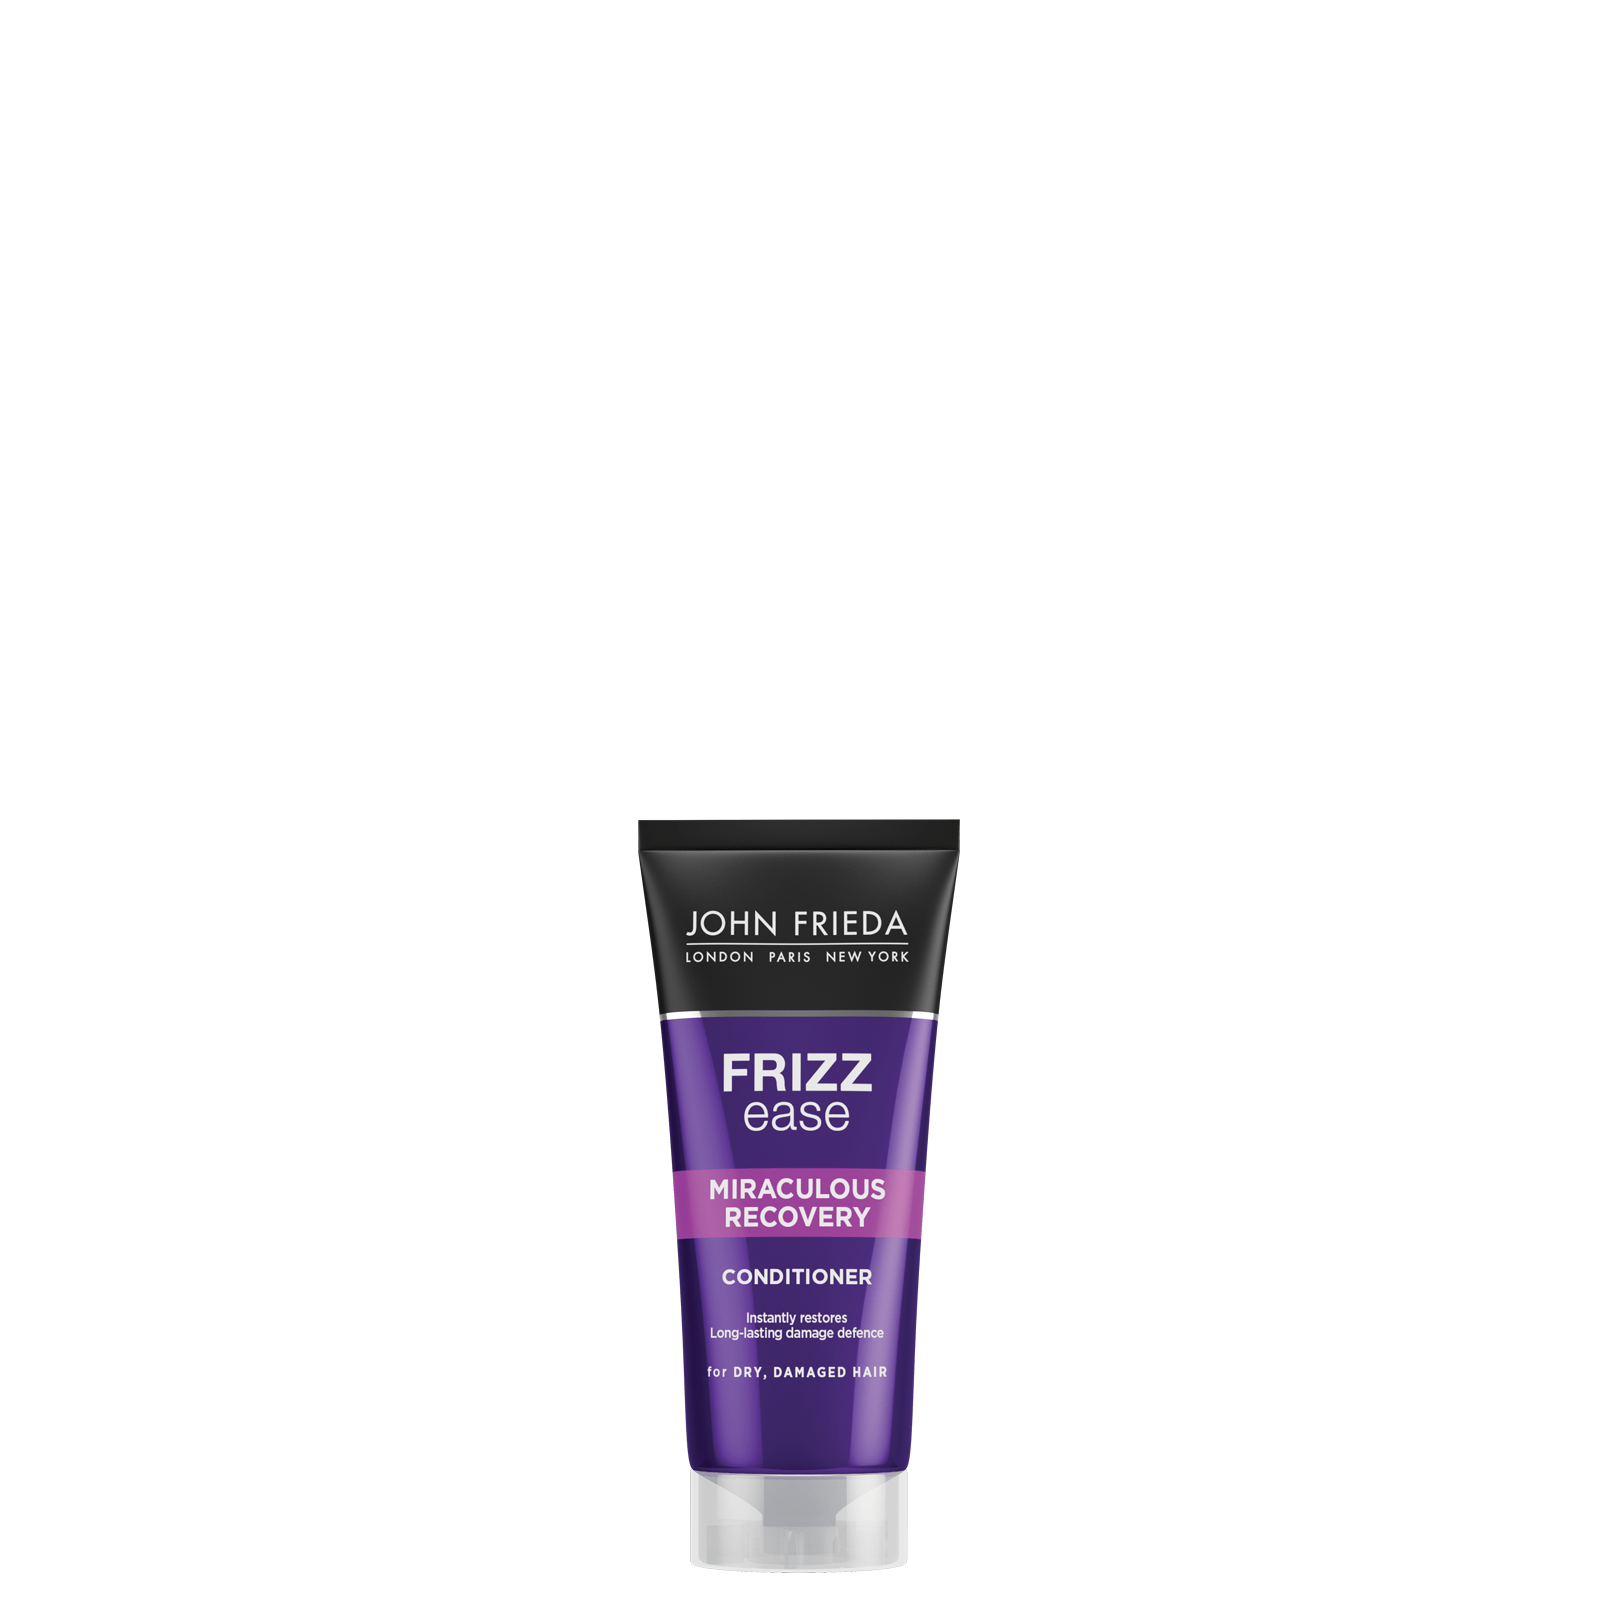 John Frieda Frizz Ease Miraculous Recovery Conditioner Travel Size 50ml